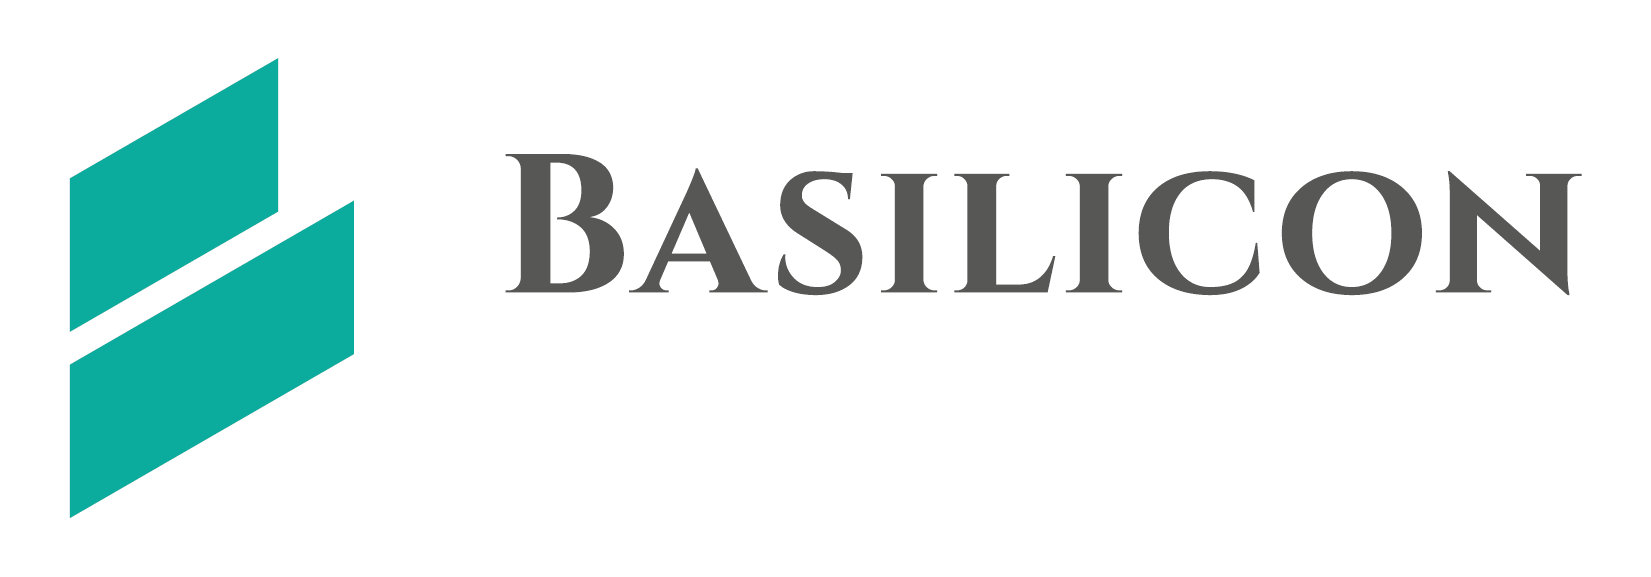 What does Basilicon offer ?